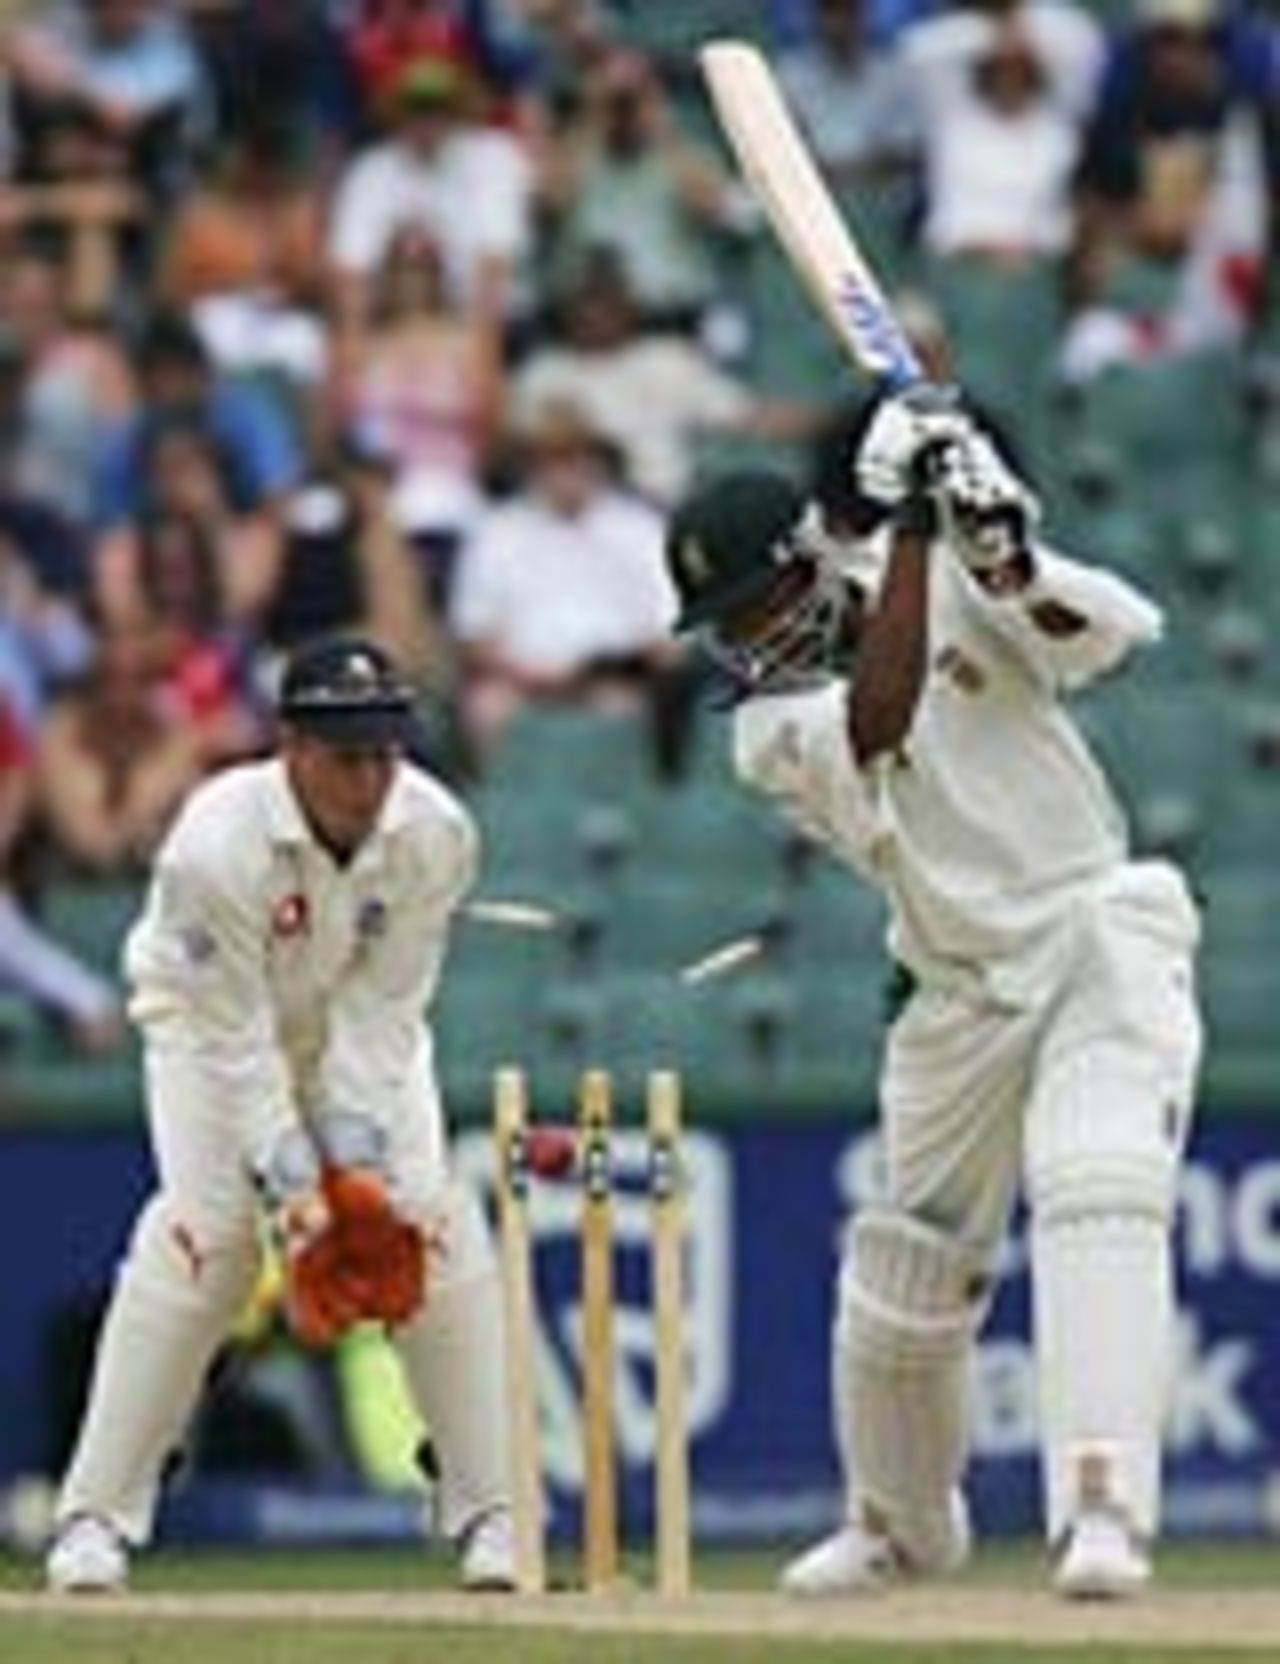 Makhaya Ntini falls to a yorker from Ashley Giles, 4th day, South Africa v England, 4th Test, The Wanderers, Johannesburg, January 16, 2005